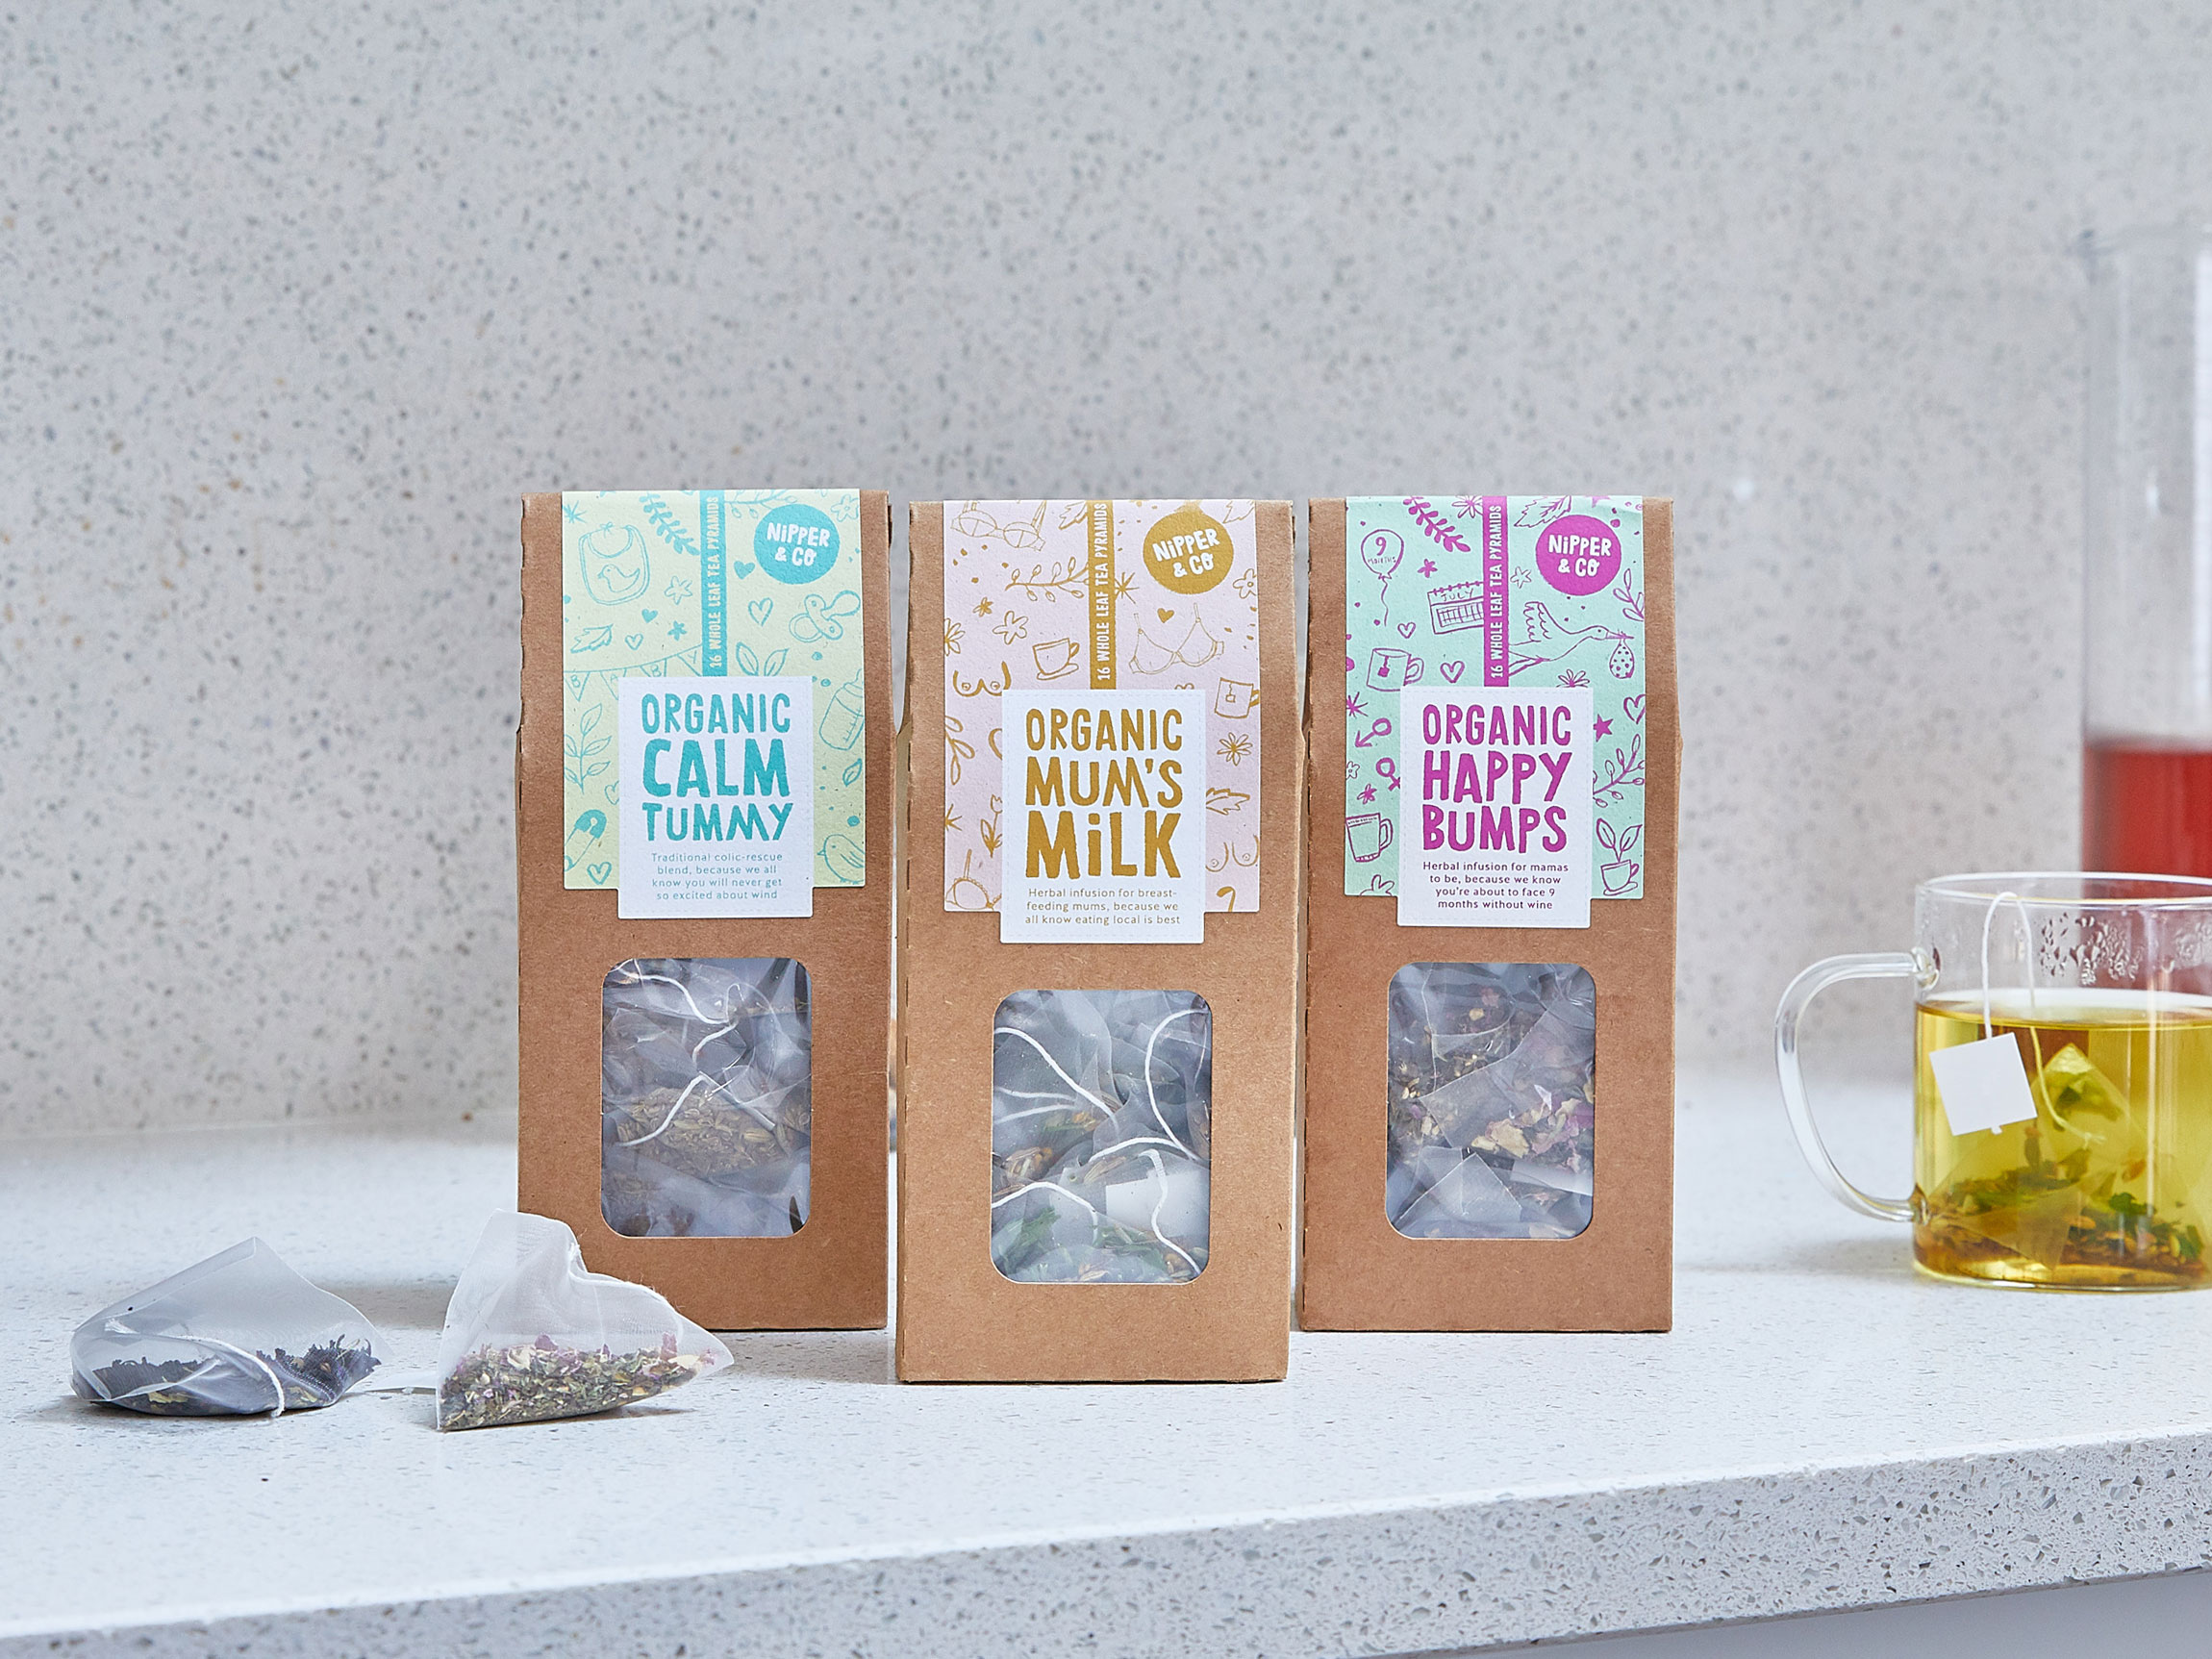 Packaging Design with Hand-Lettering and Illustrations for Organic Tea Brand Range